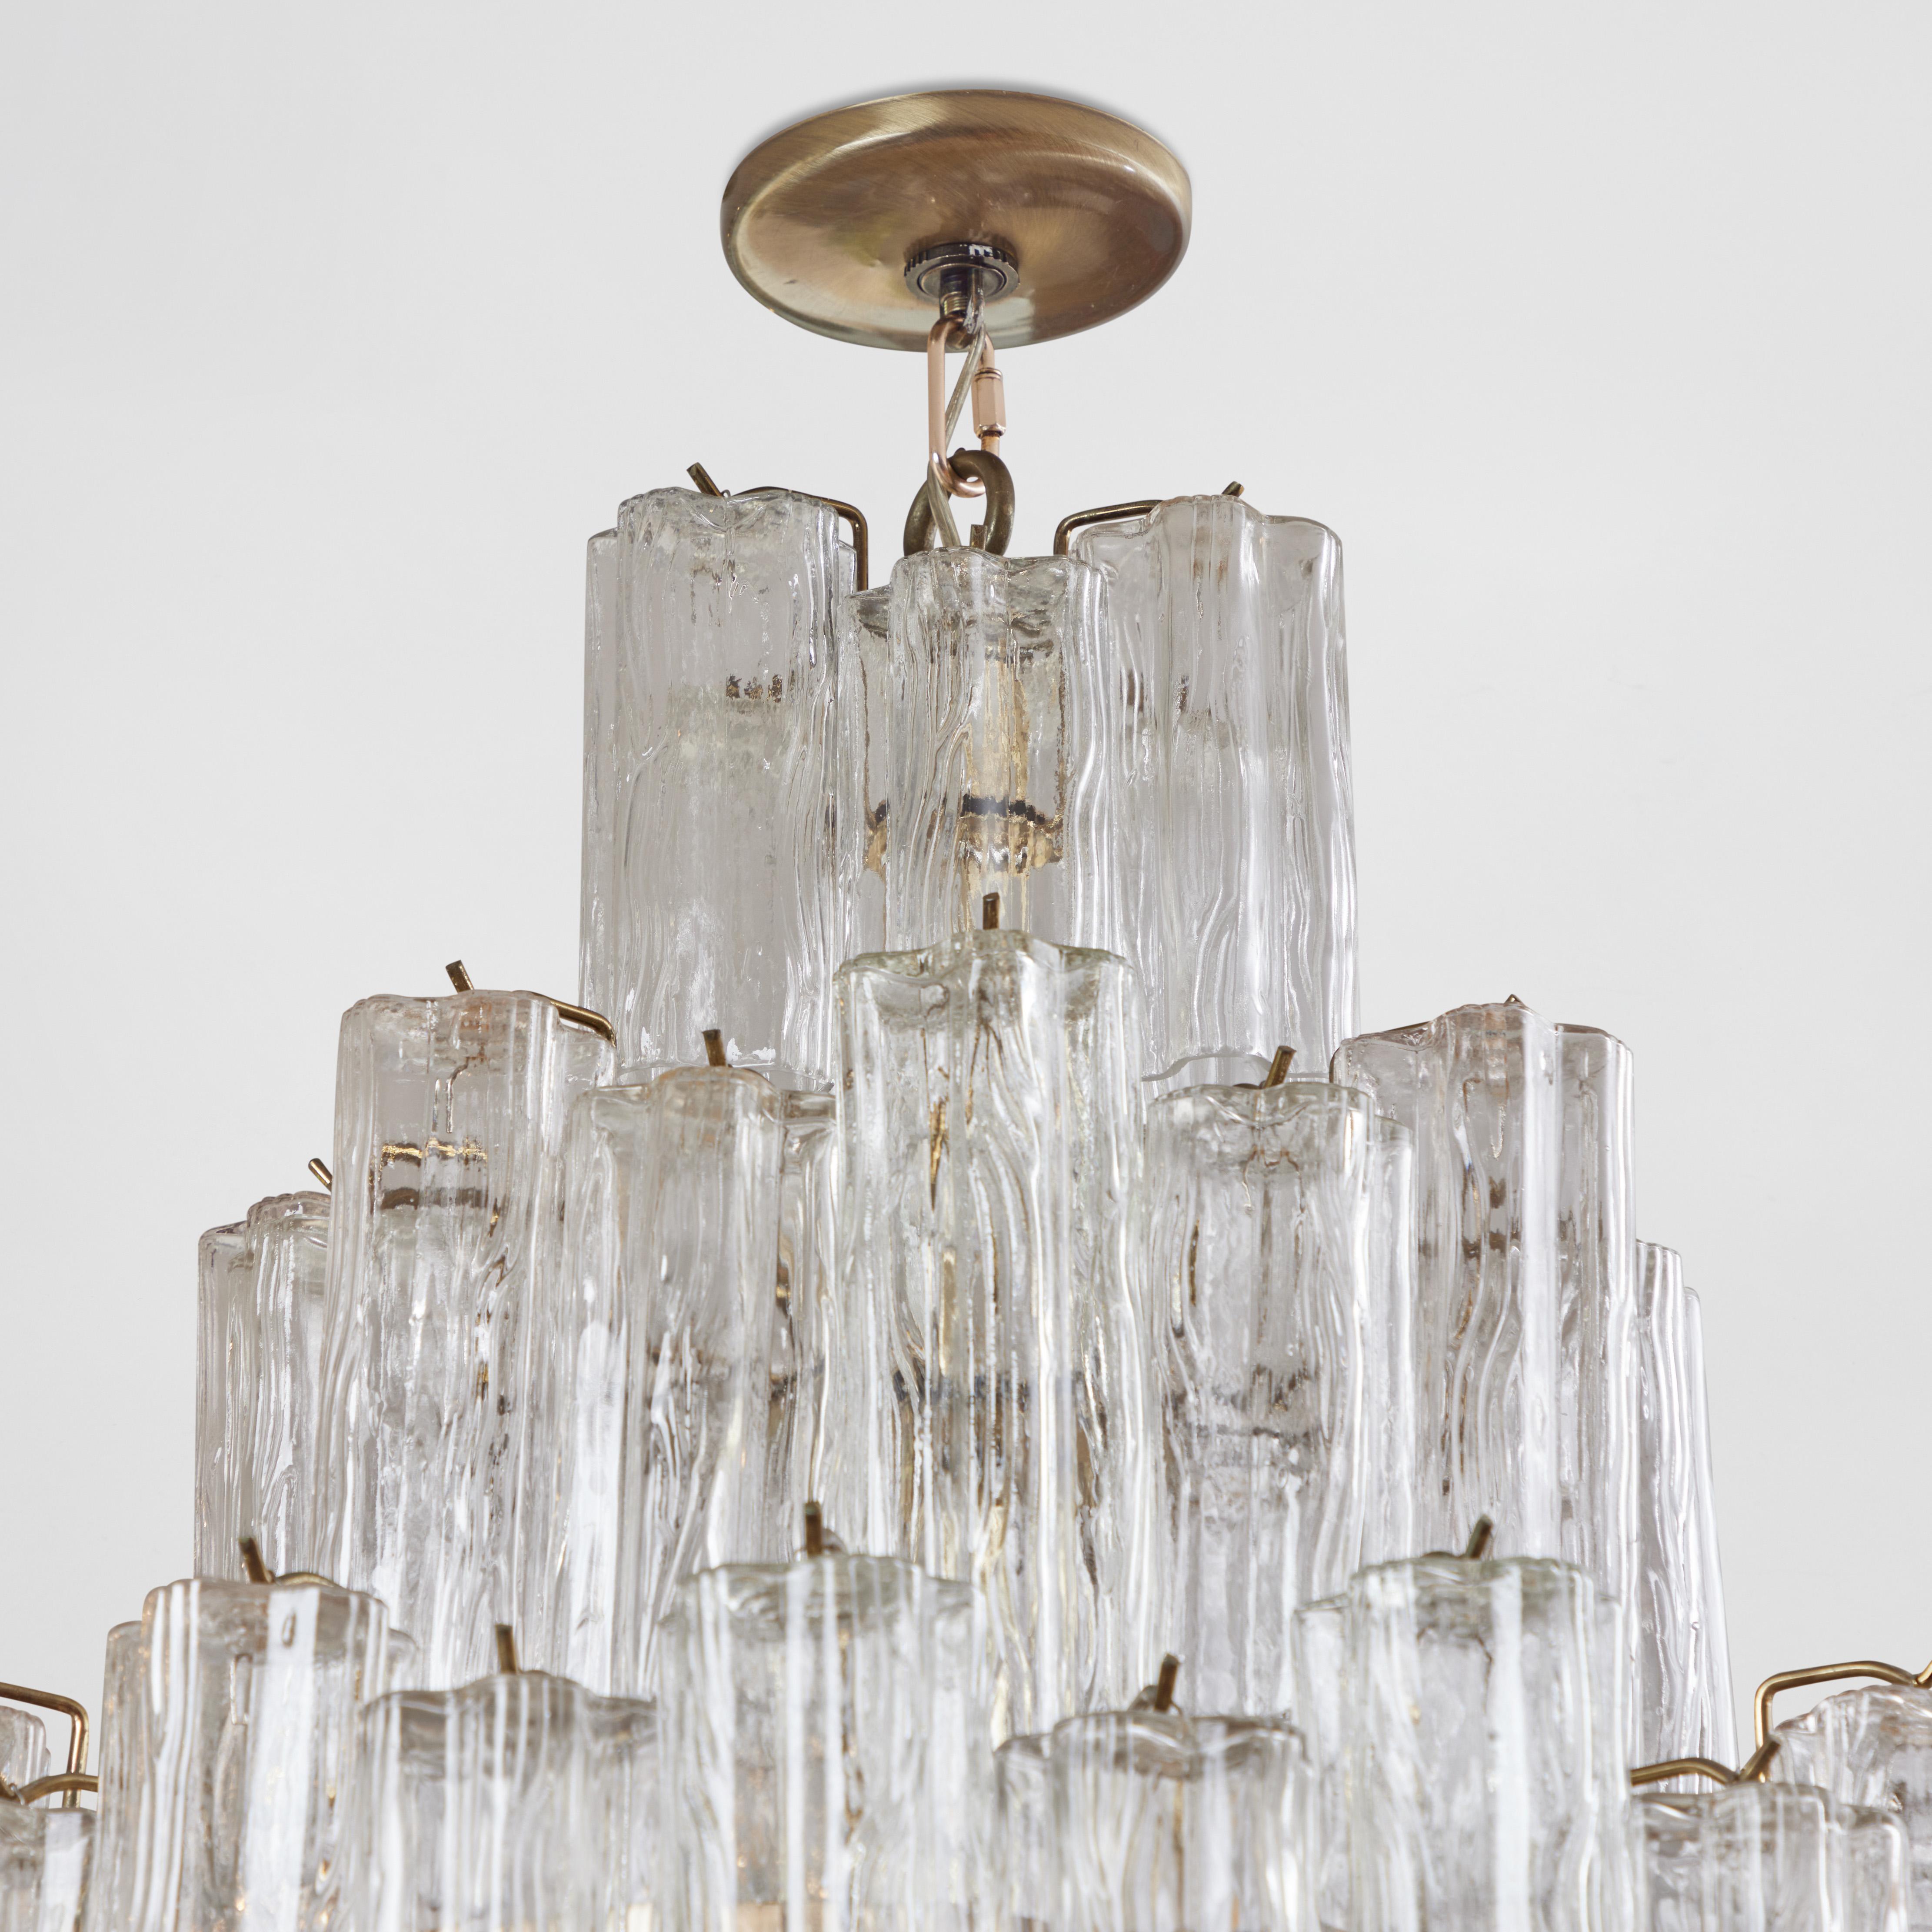 Mid-Century Modern A Vintage 7 Tiered Tronchi Chandelier Attributed to Venini